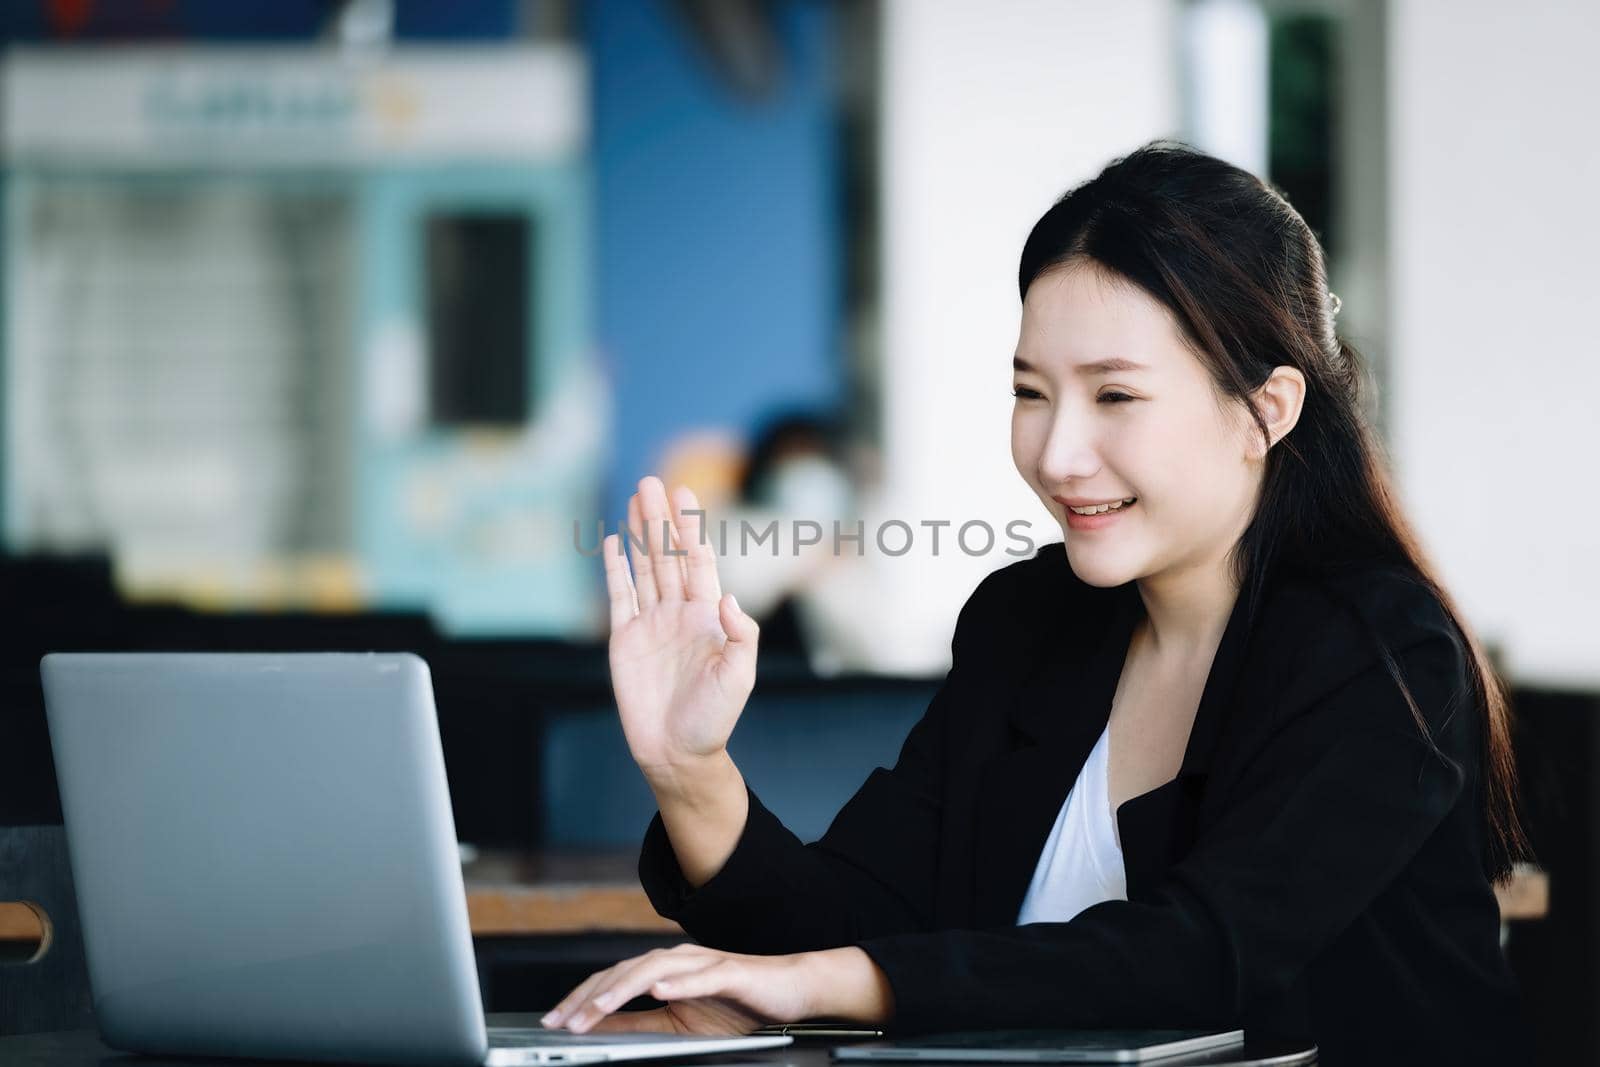 An Asian female employee or businessman is smiling and waving to a colleague using a notebook computer via video conferencing